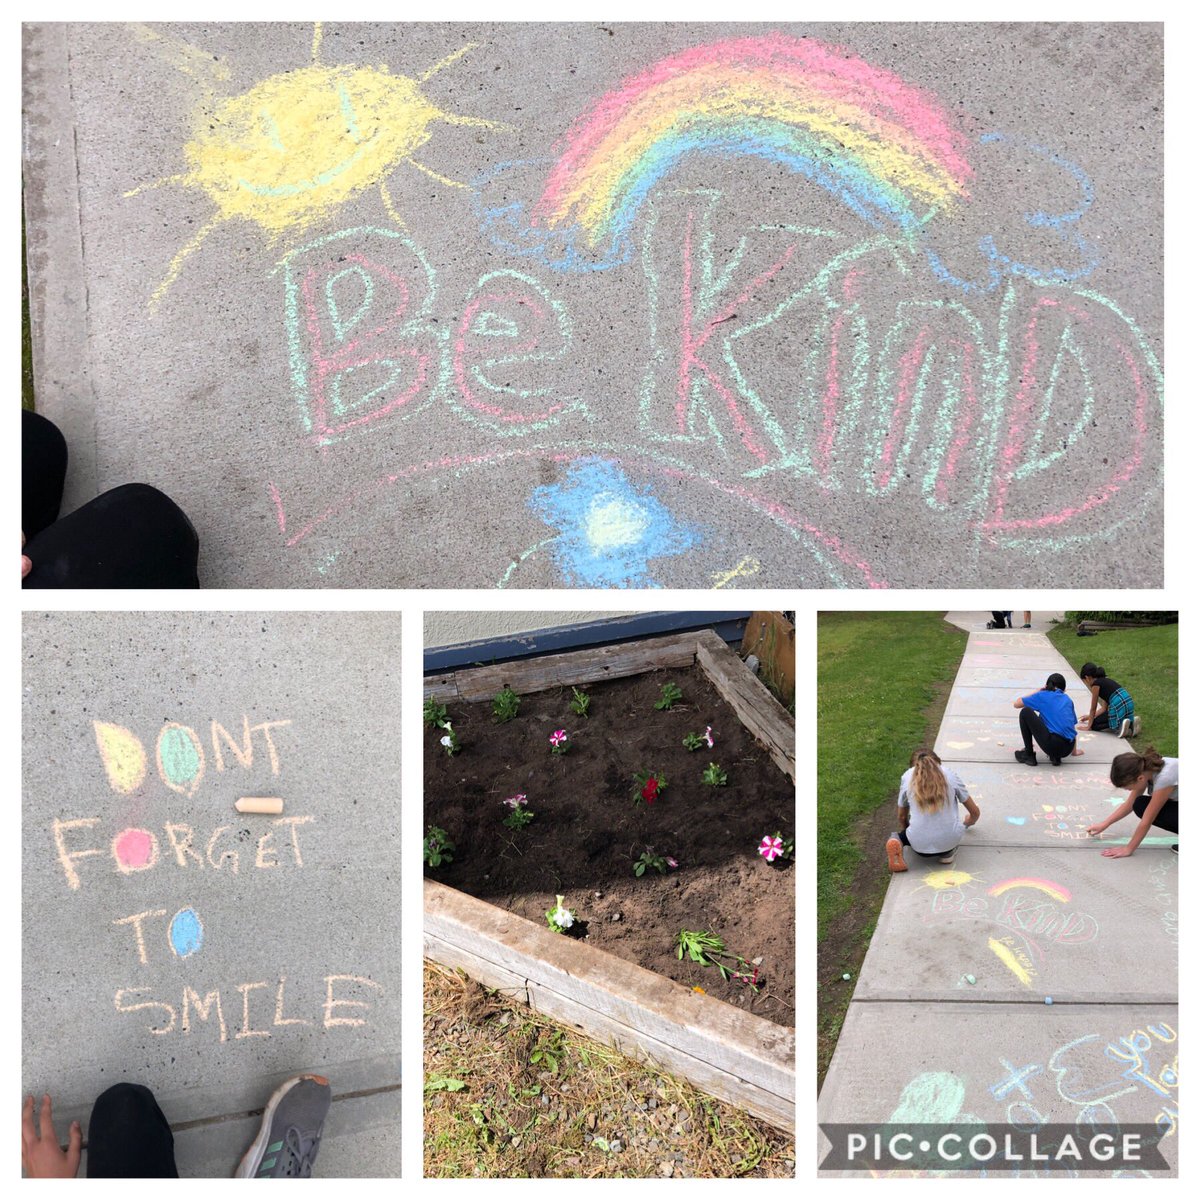 How can we share kindness around our school @crescentpark36 ? By weeding, planting and writing kind messages to brighten someone’s day 🌞🌸 #kindnessinquiry #sd36learn